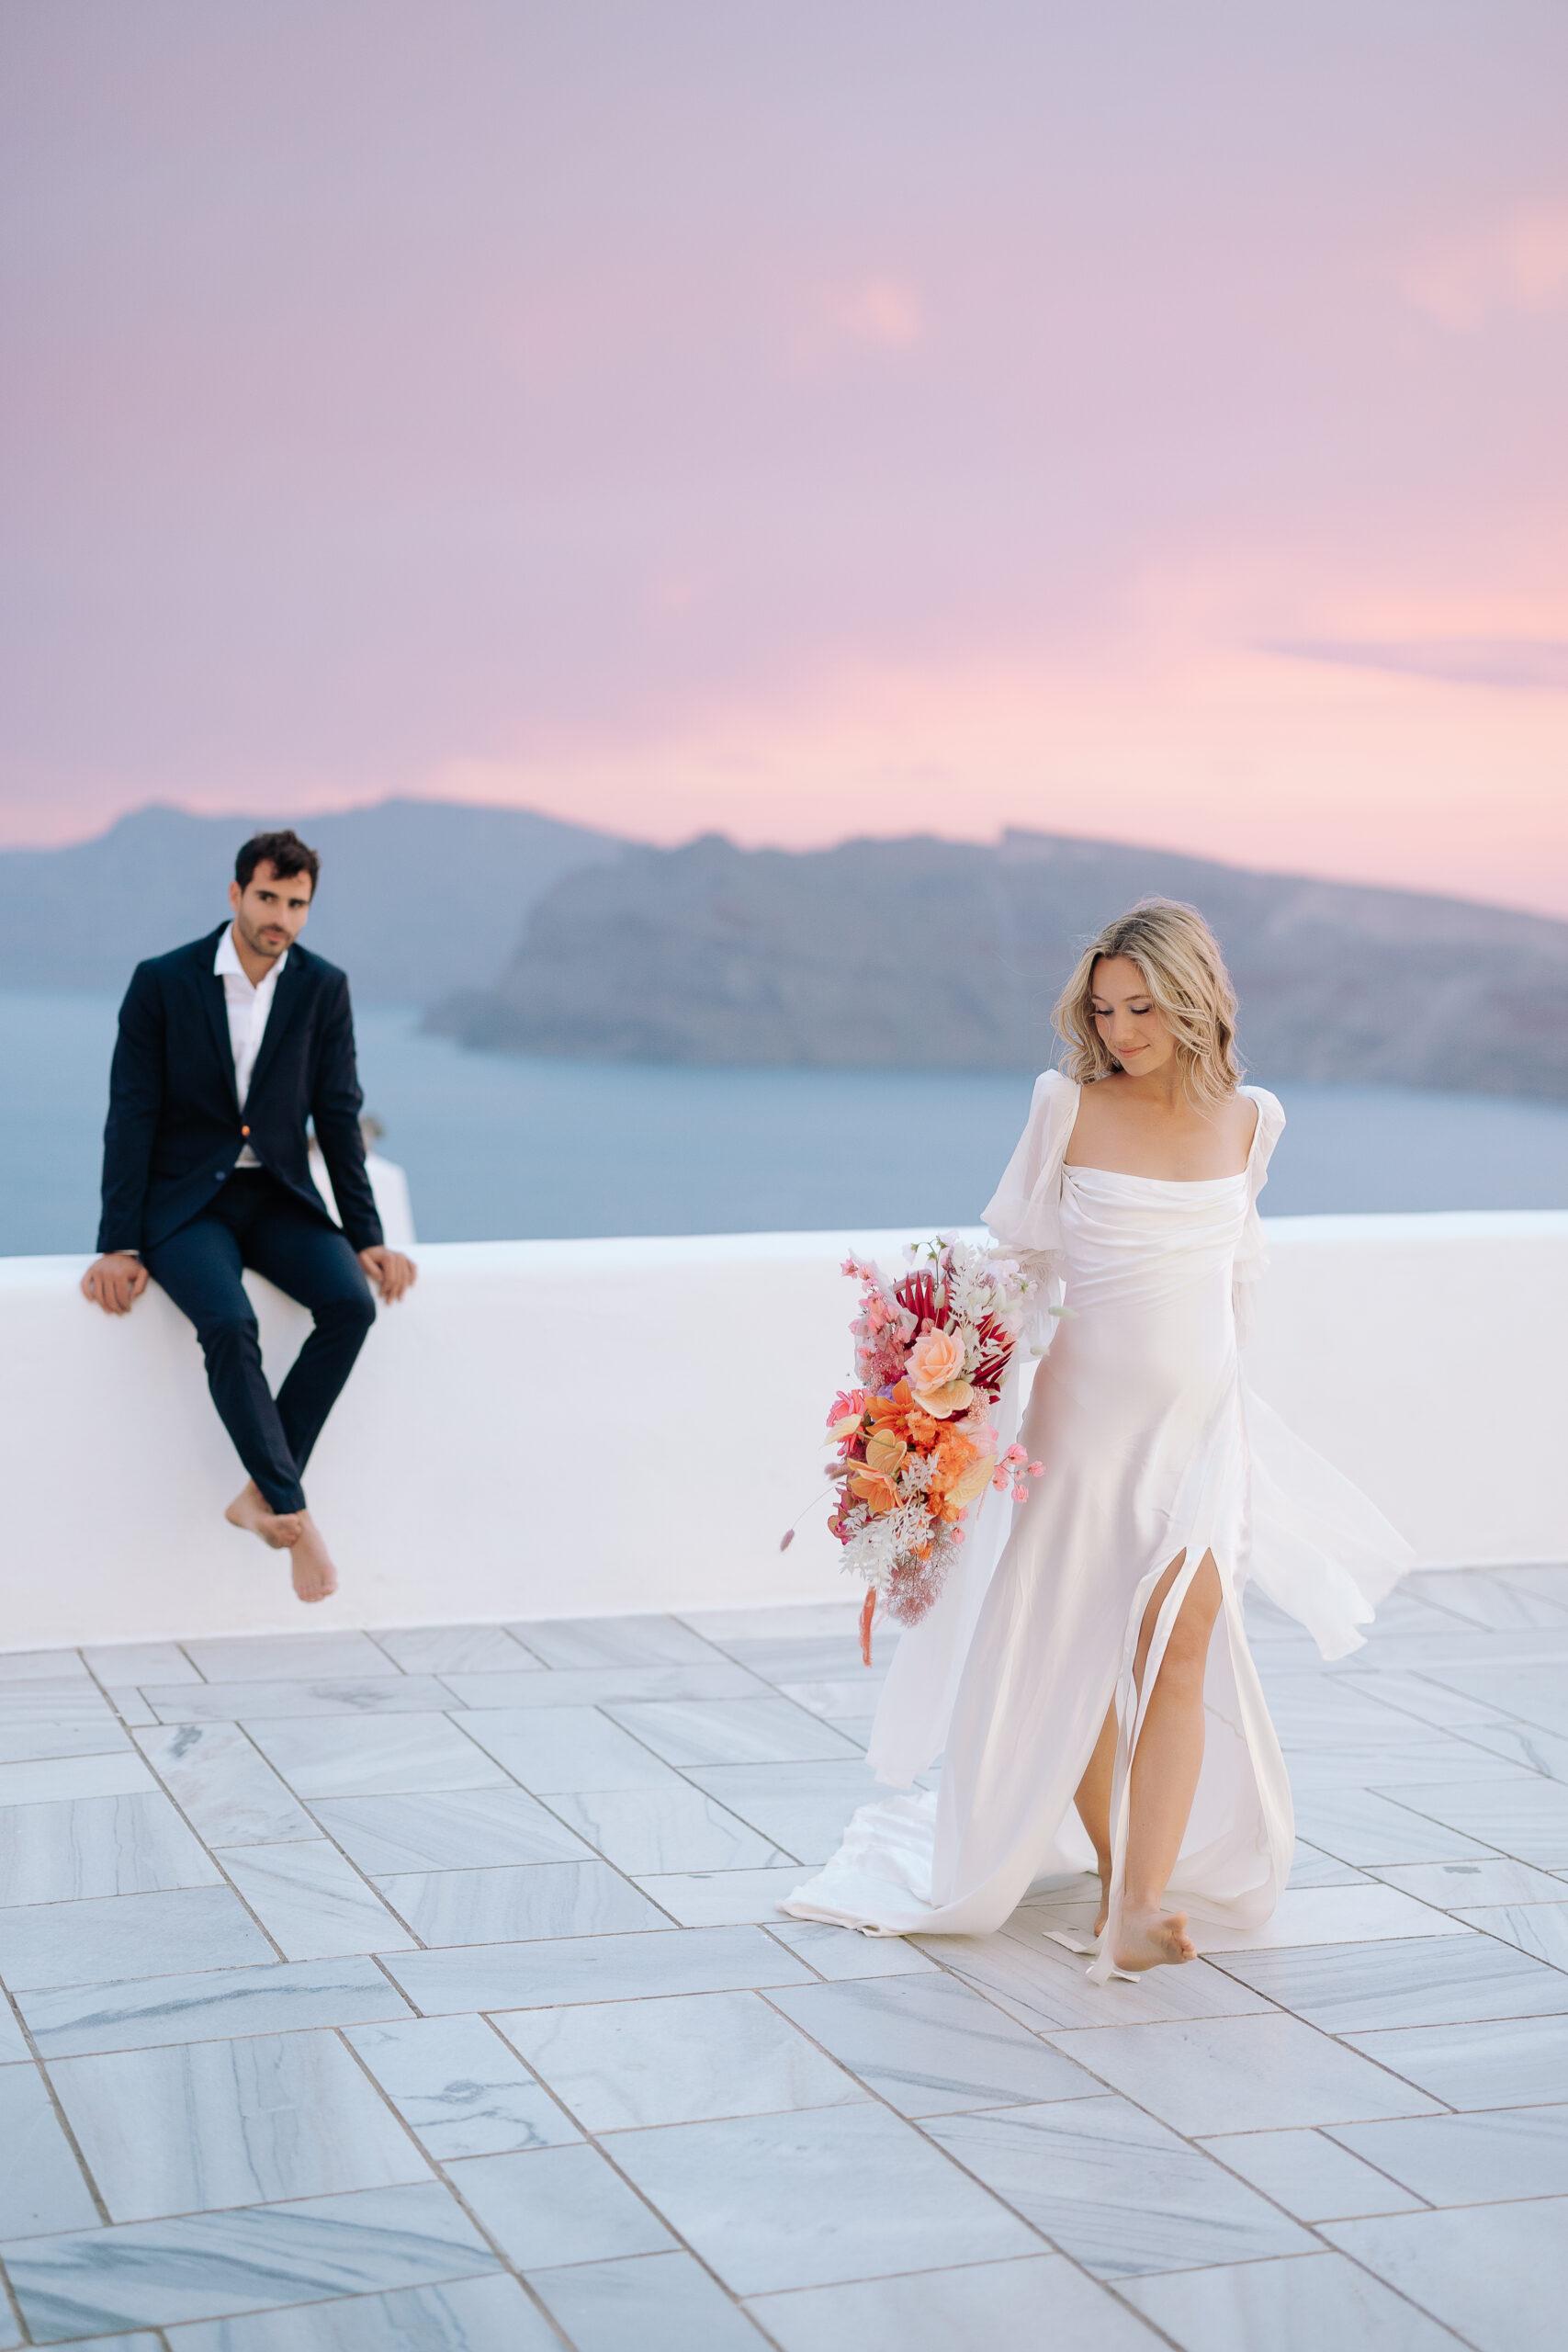 This Couple's Magical Oia Elopement Will Make You Want to Get Married in Santorini